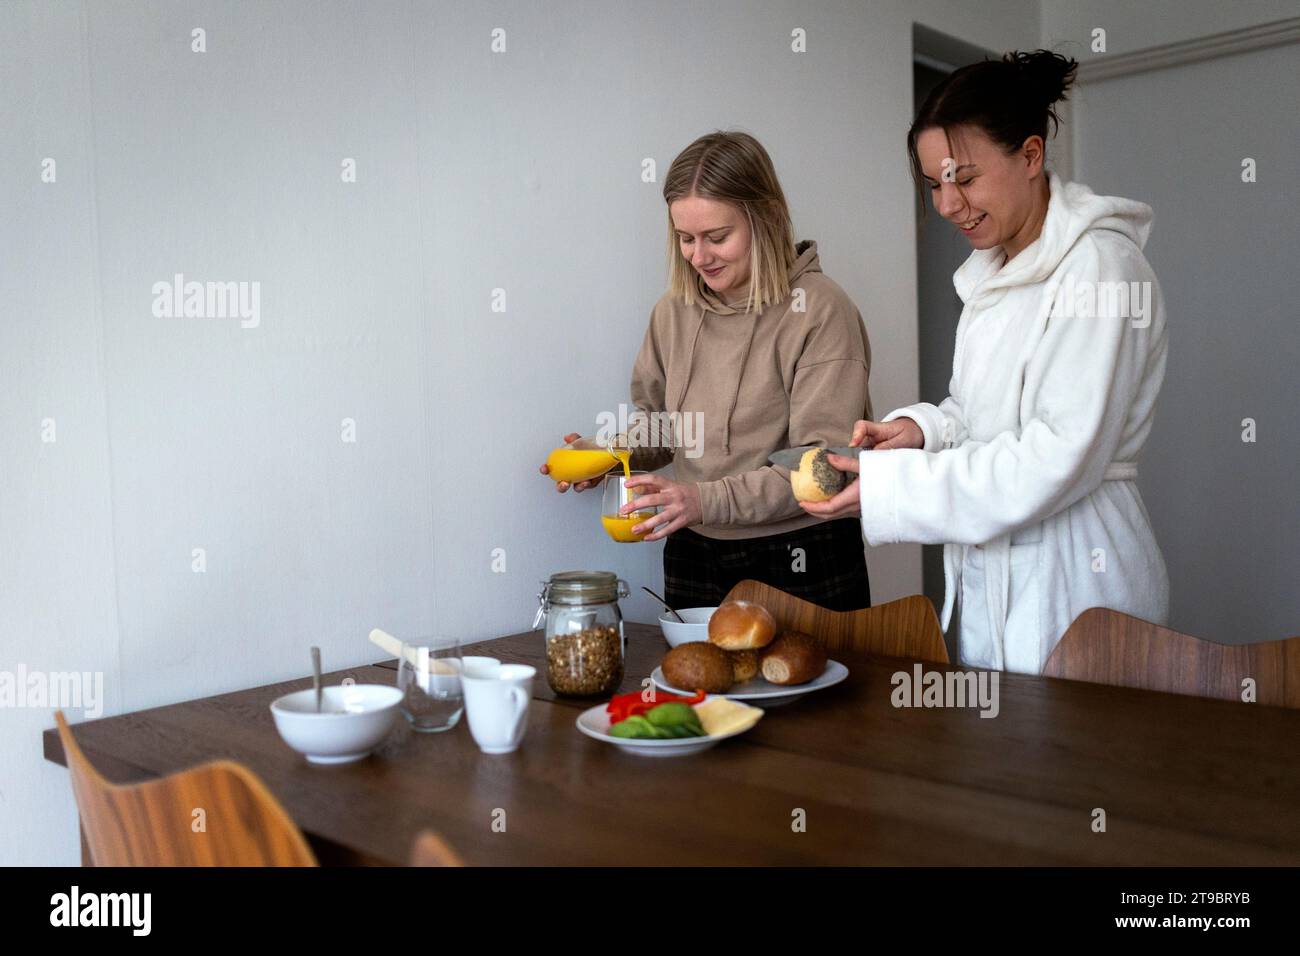 Smiling lesbian couple preparing breakfast at dining table Stock Photo